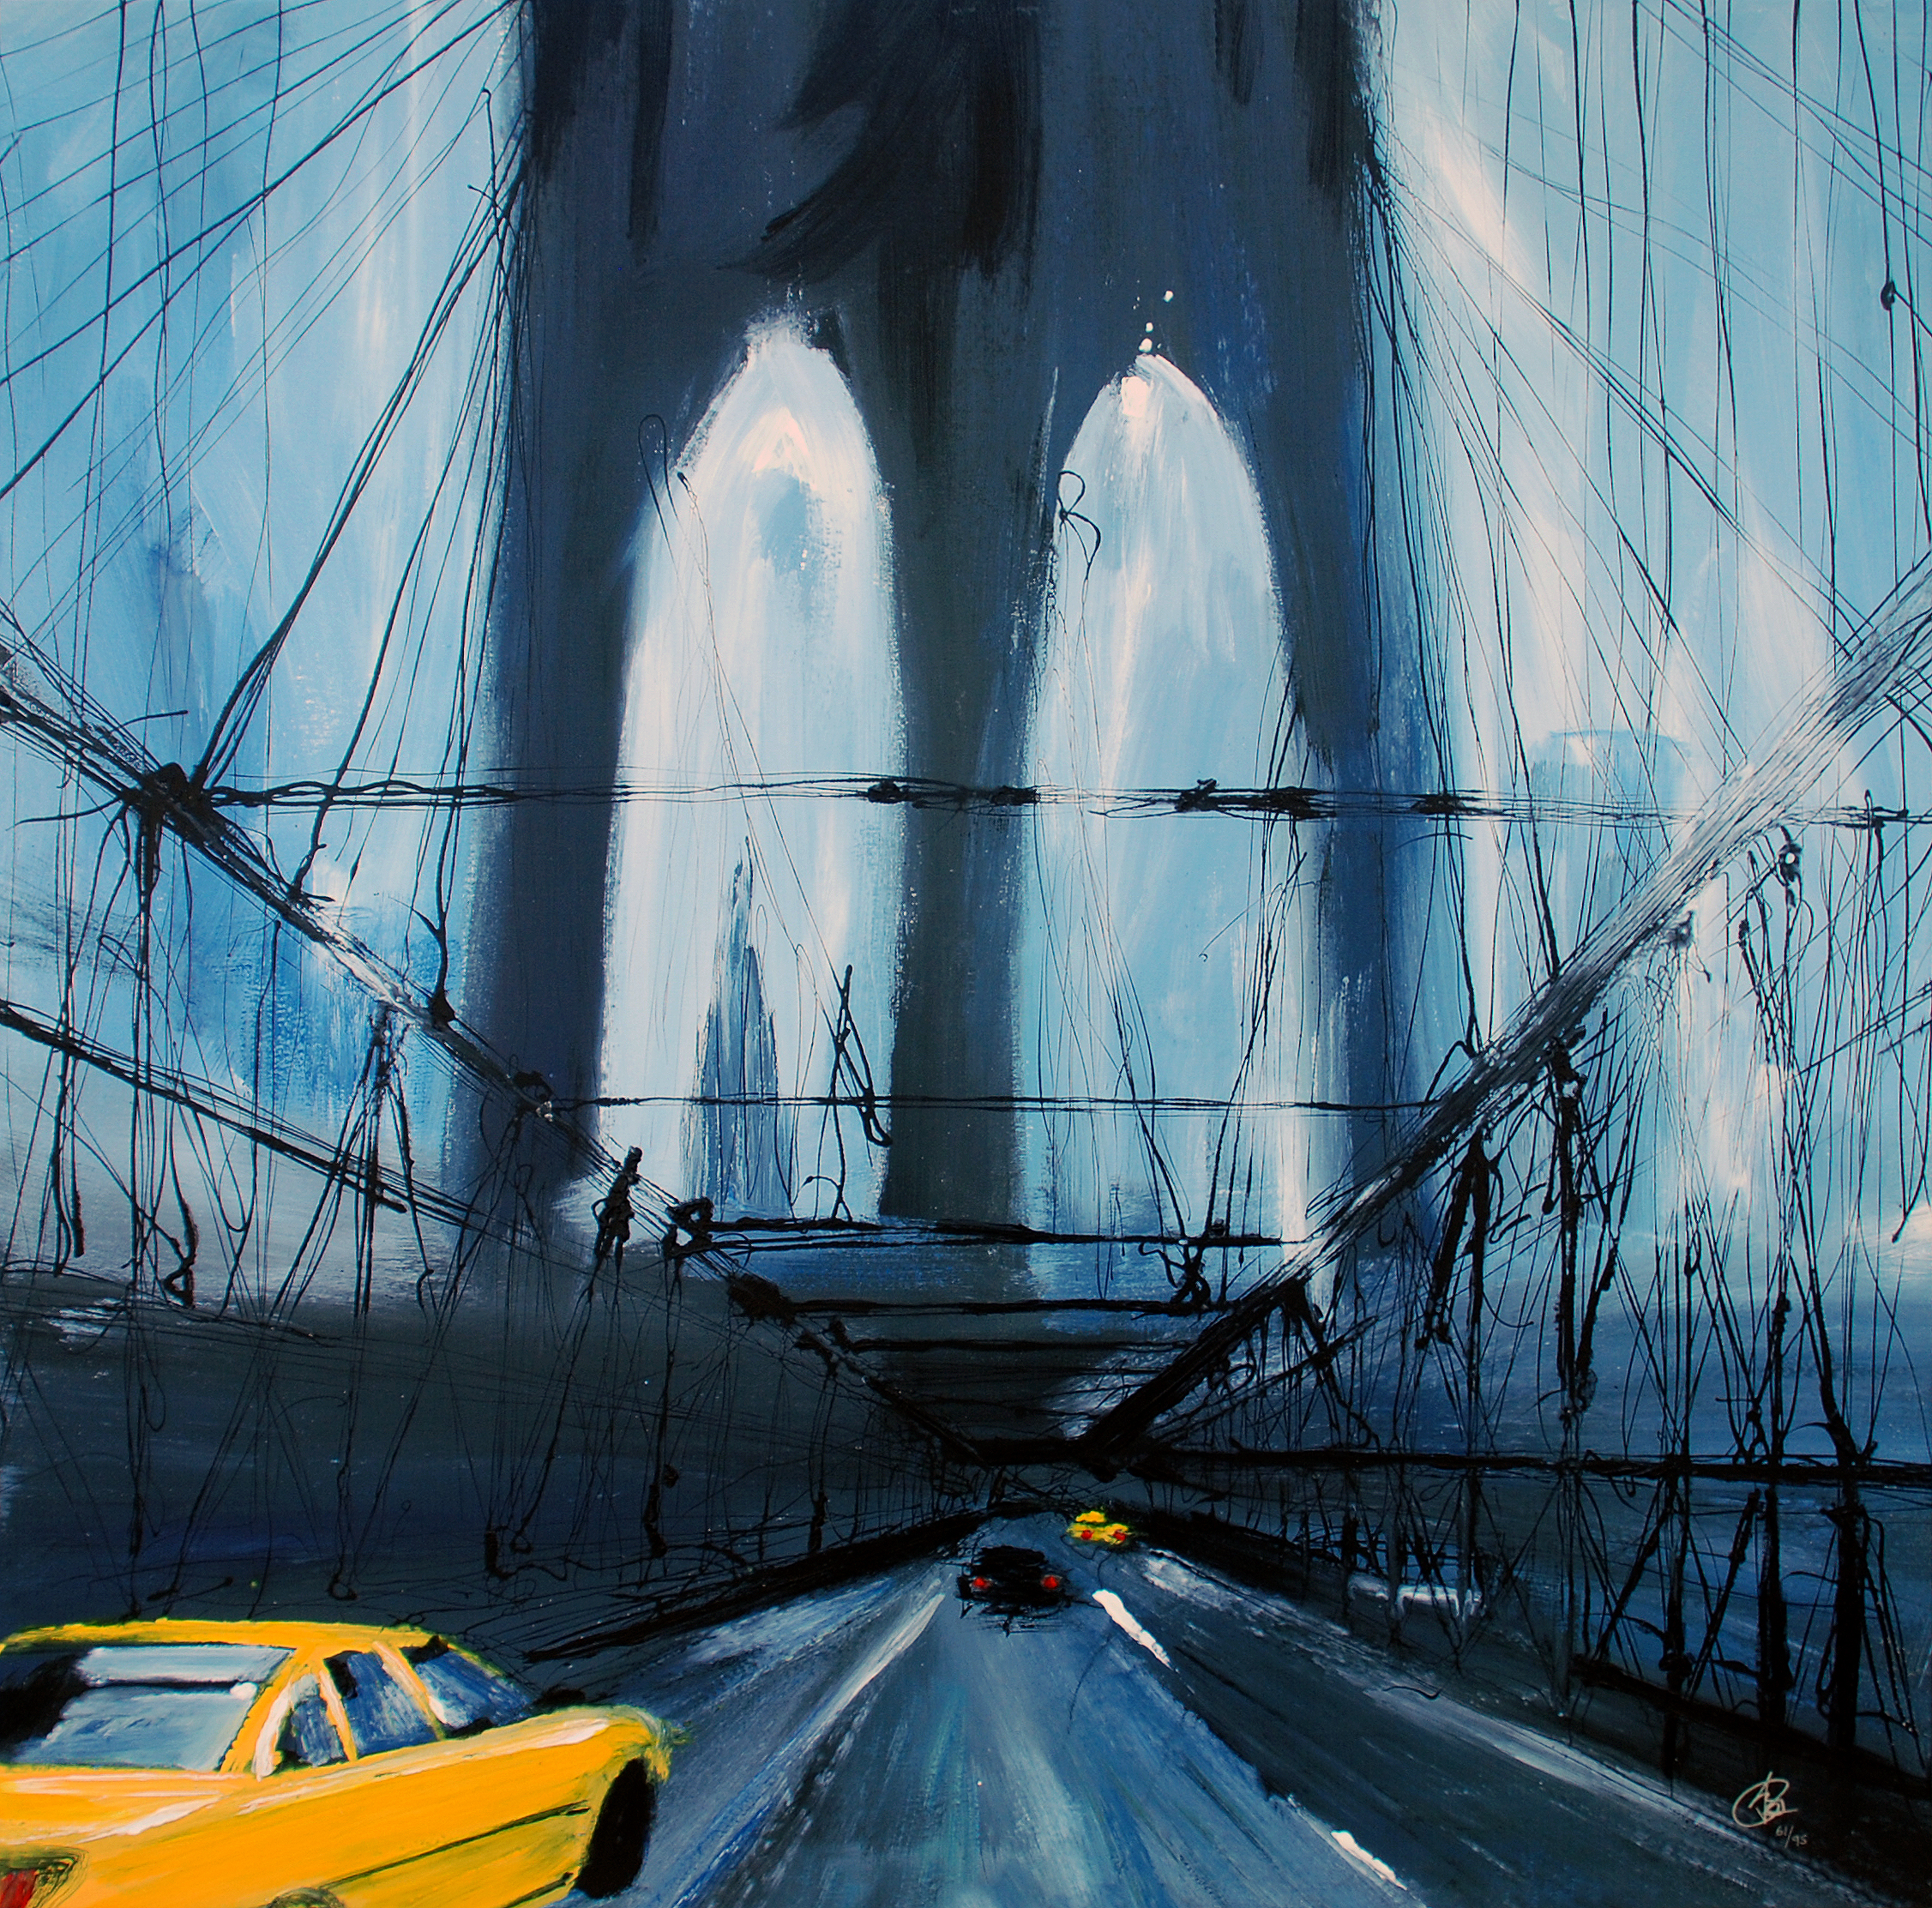 City of Dreams by Paul Kenton, UK contemporary cityscape artist, a limited edition print from his New York Collection